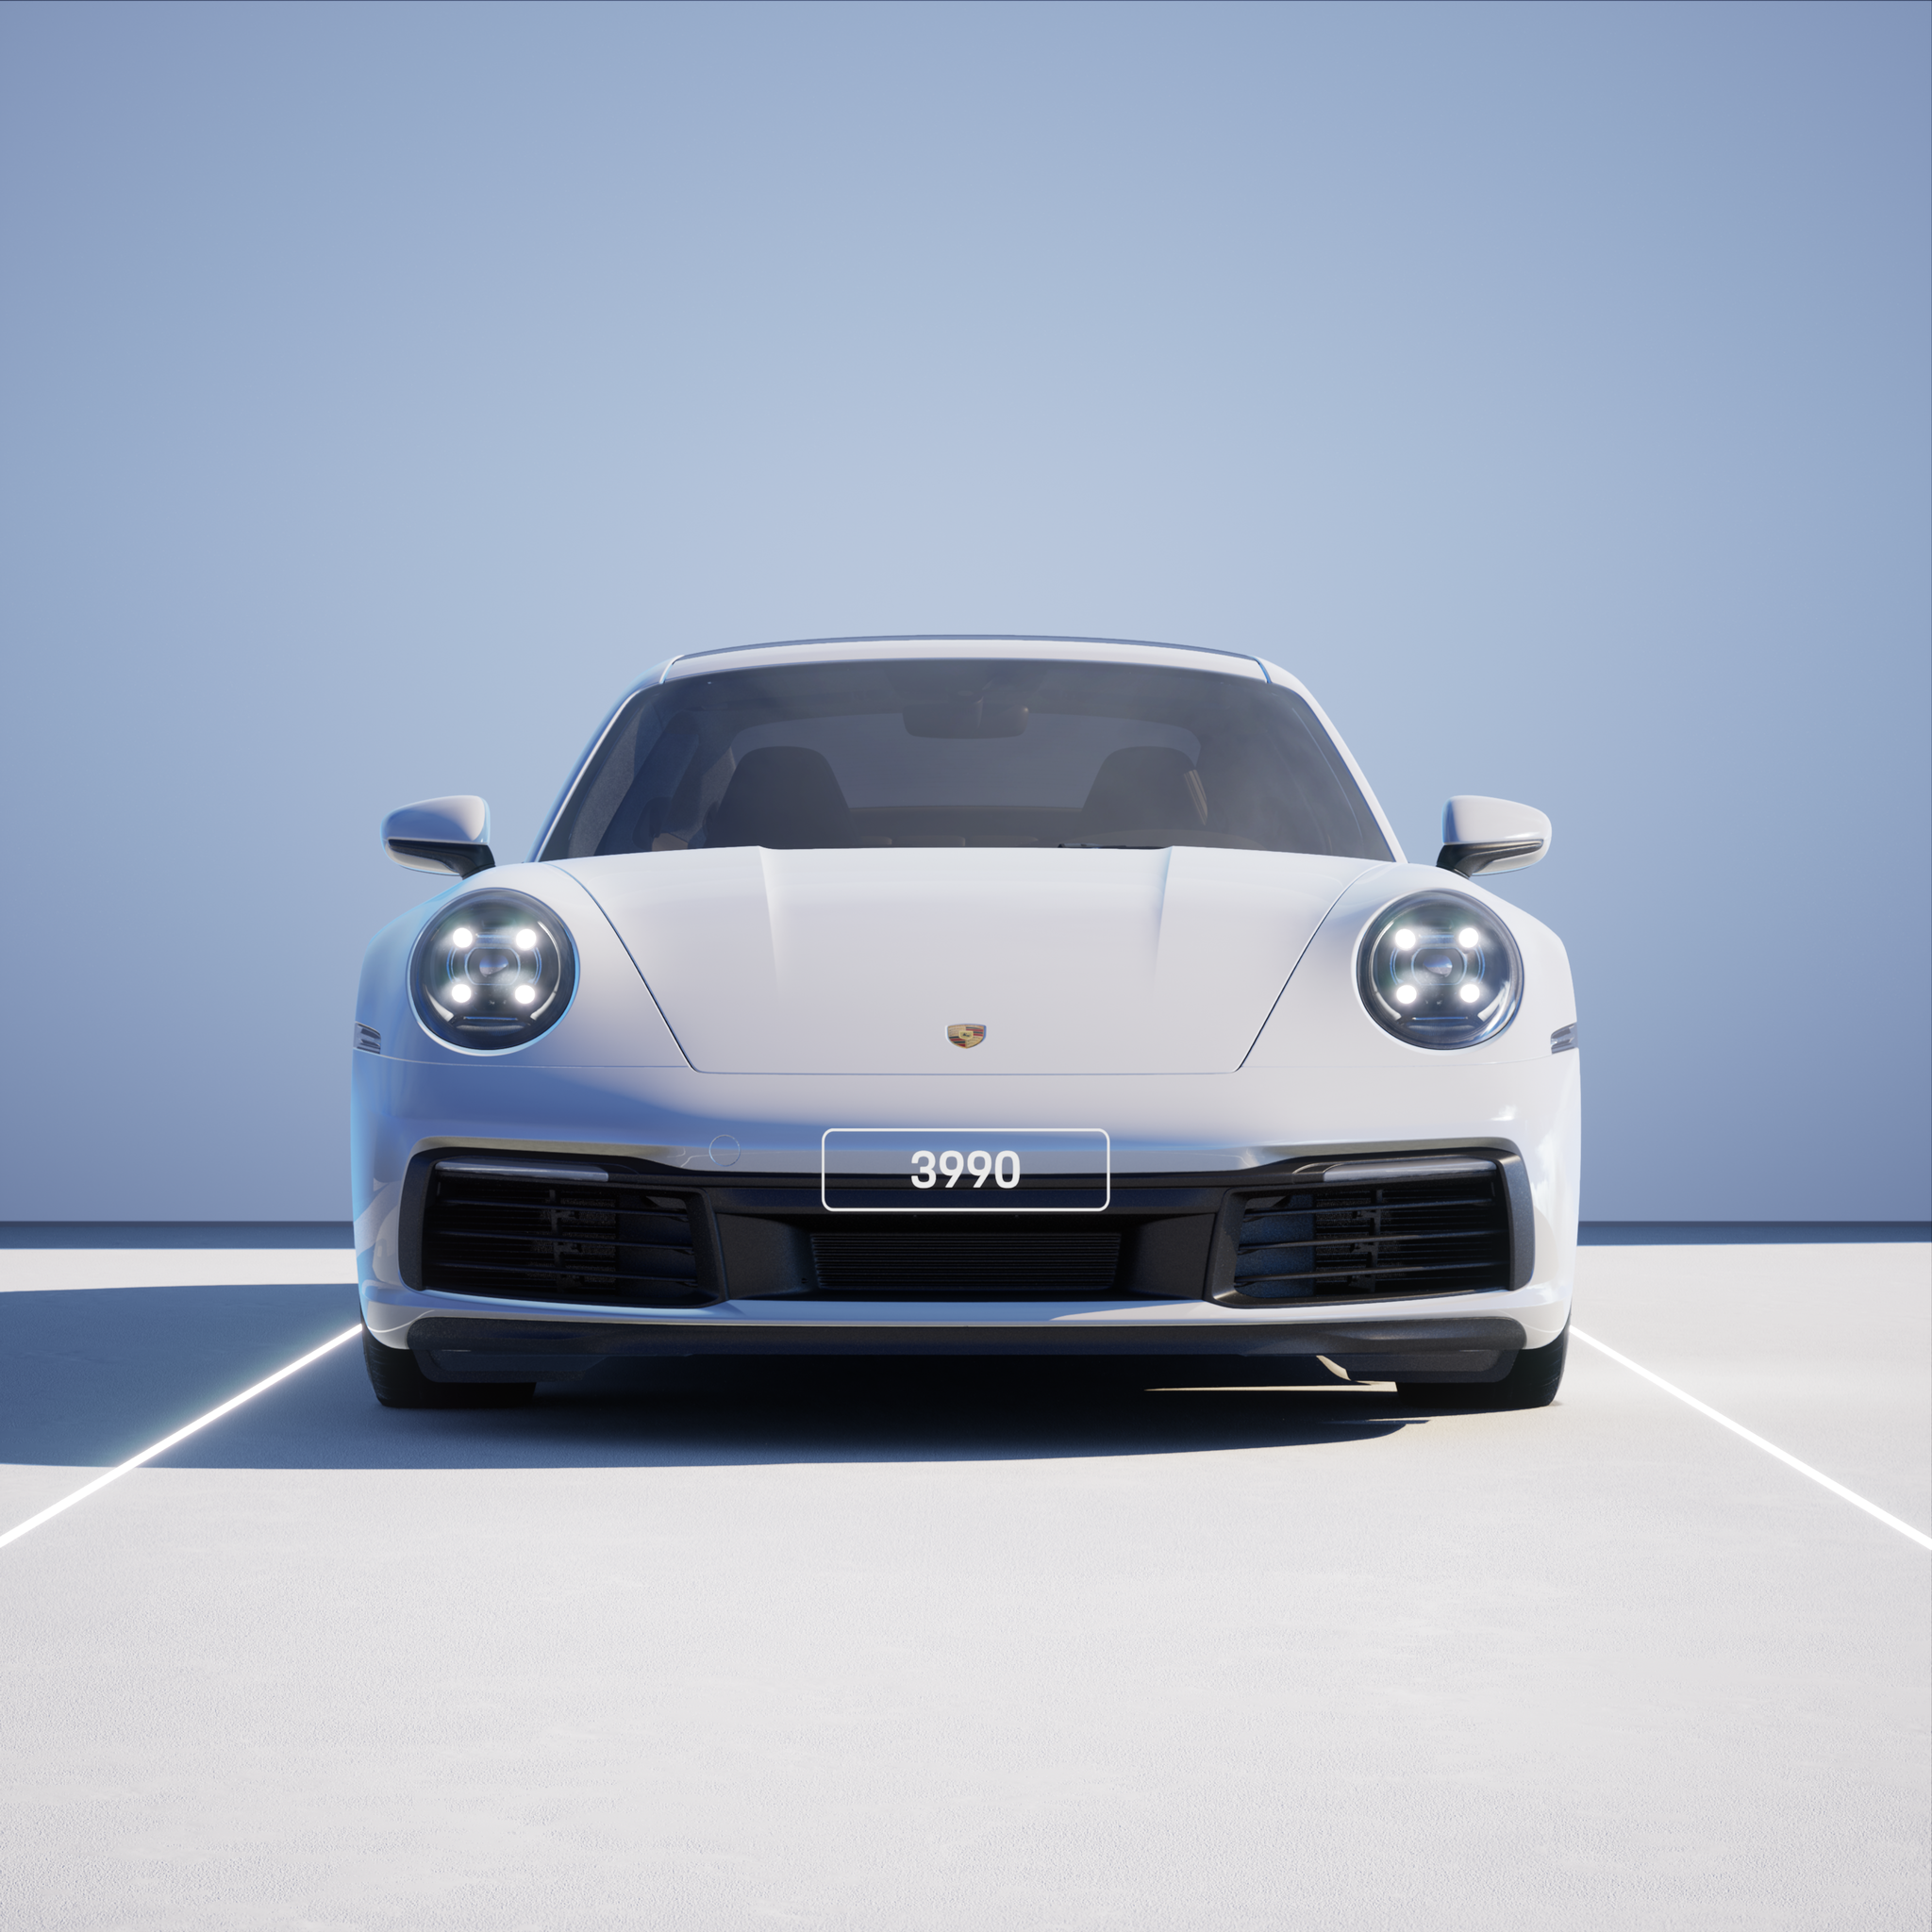 The PORSCHΞ 911 3990 image in phase